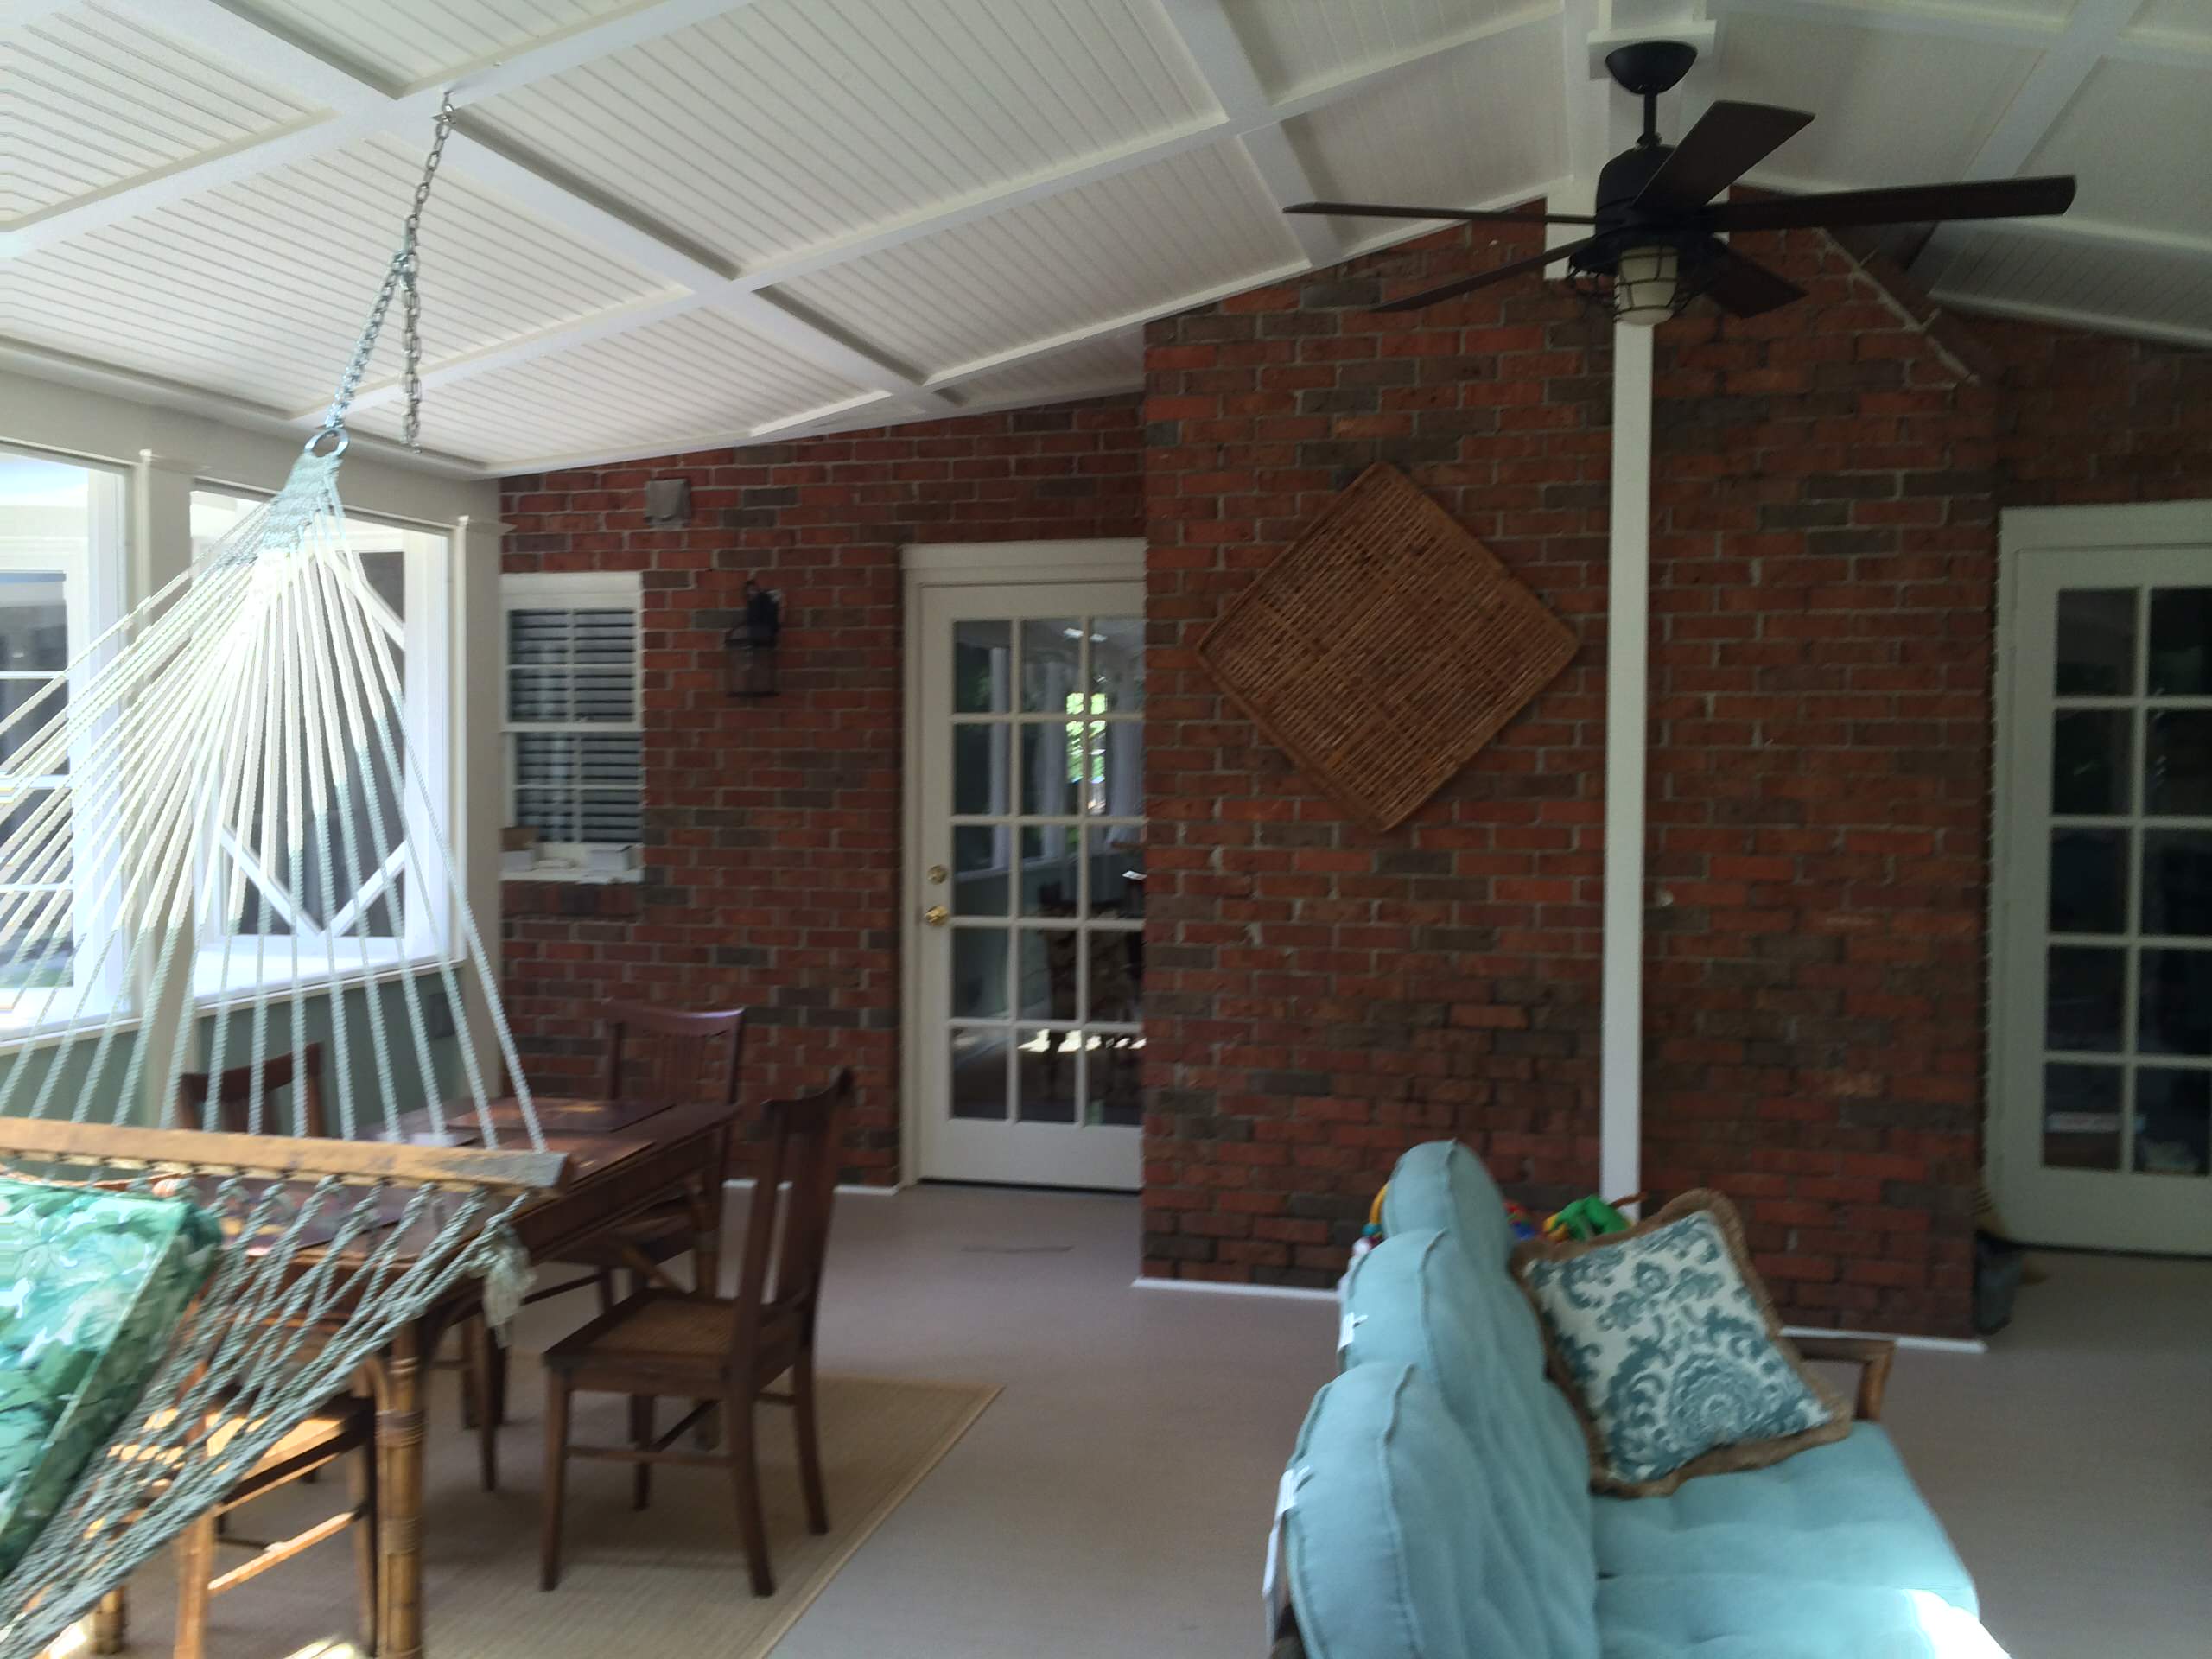 Second Story Screened In Porch